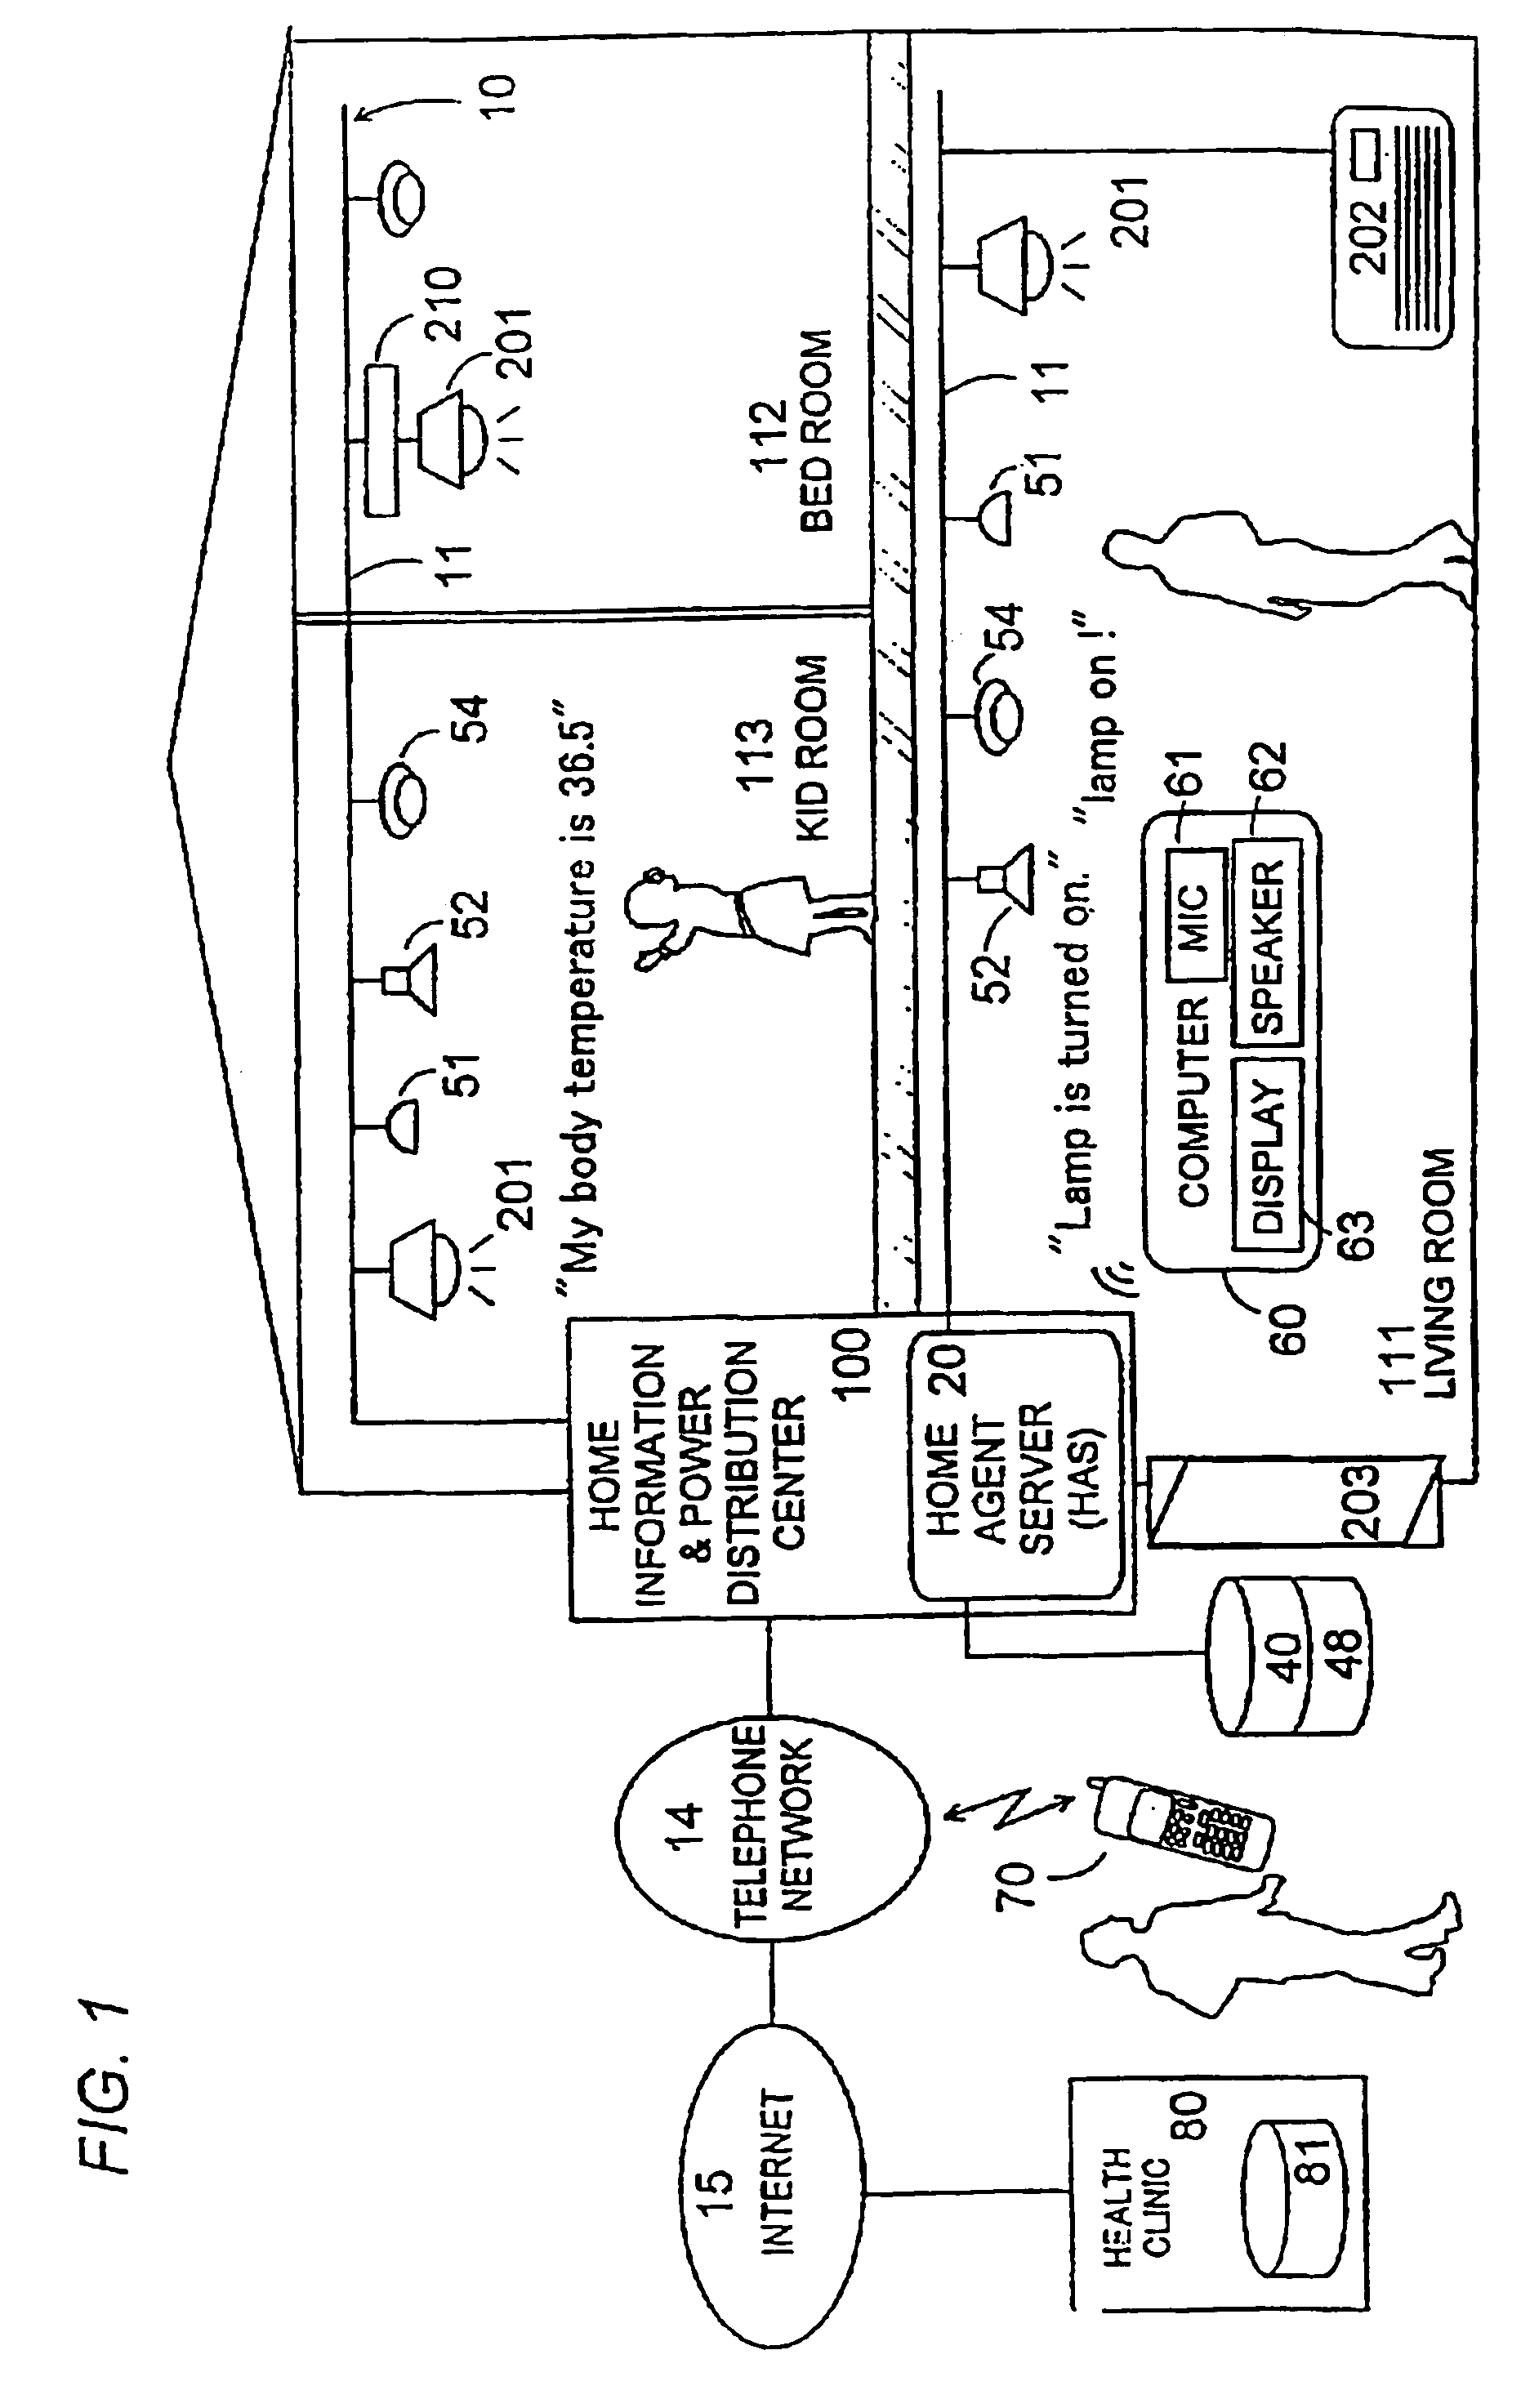 Voice control system for operating home electrical appliances